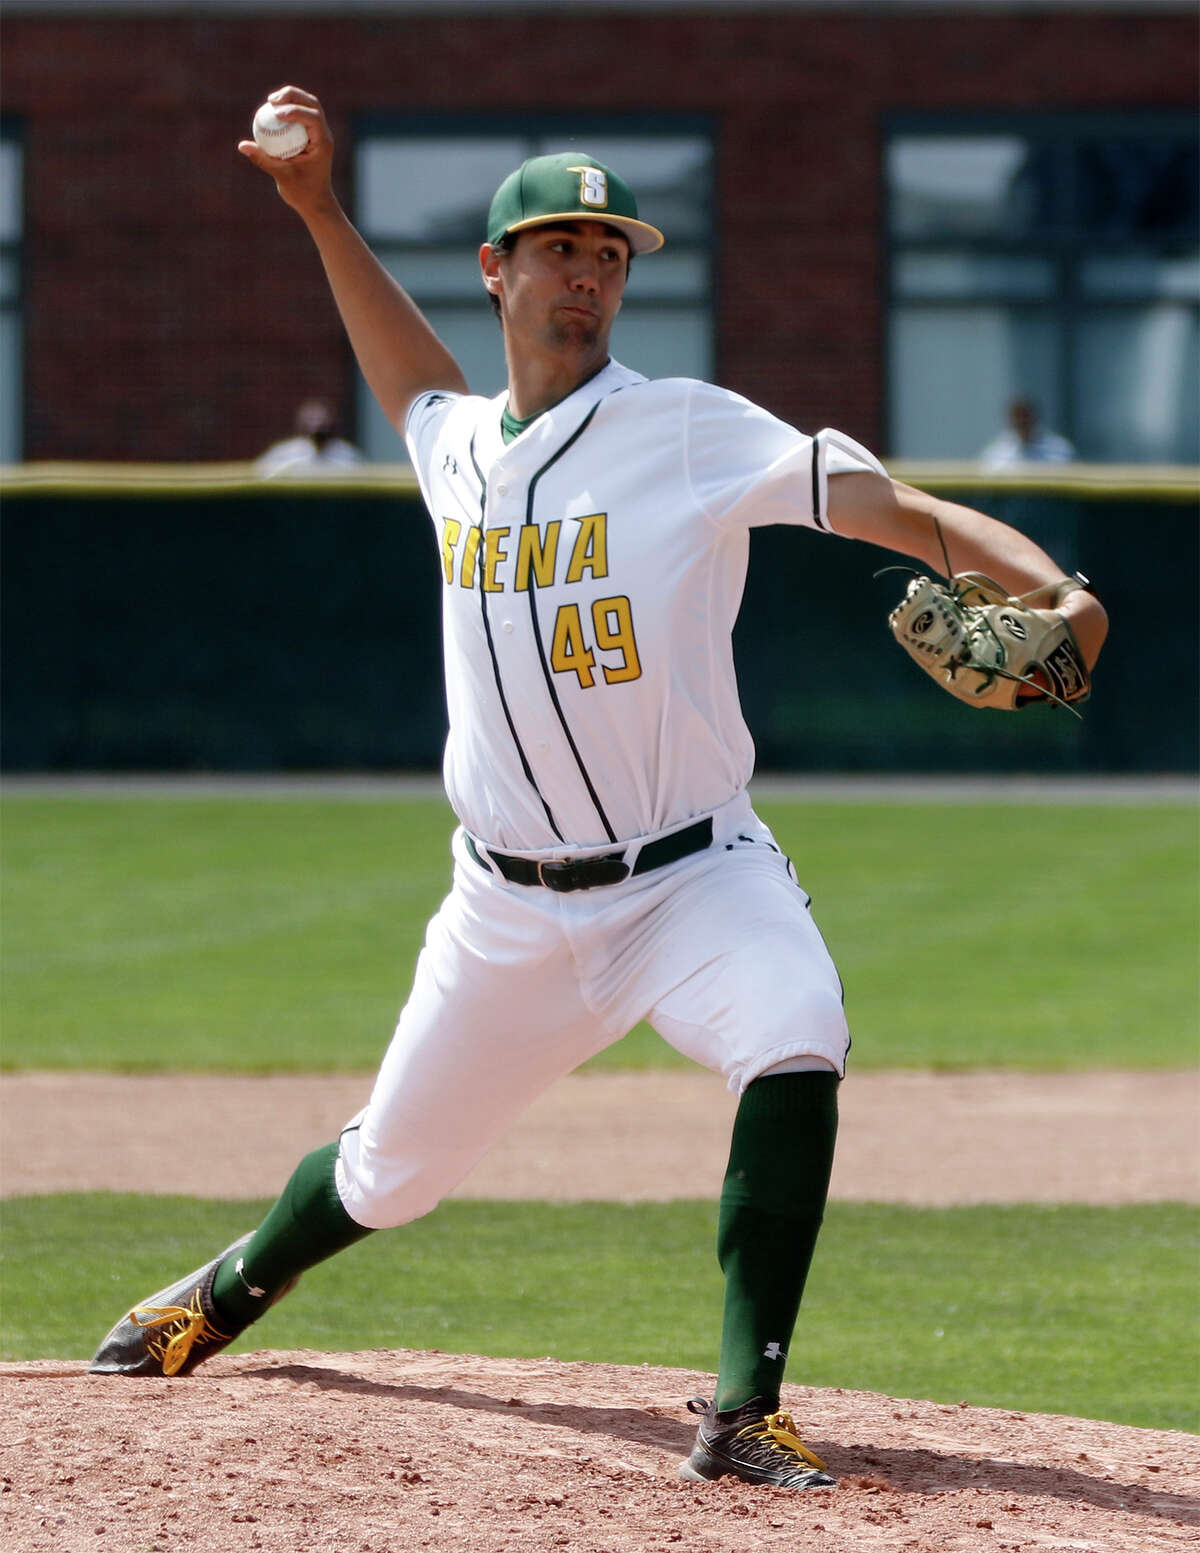 Siena senior Arlo Marynczak, seen during the 2021 season, threw five strong innings for the Albany Dutchmen on Saturday night, striking out five while giving up the only run in a 1-0 loss to Saugerties.